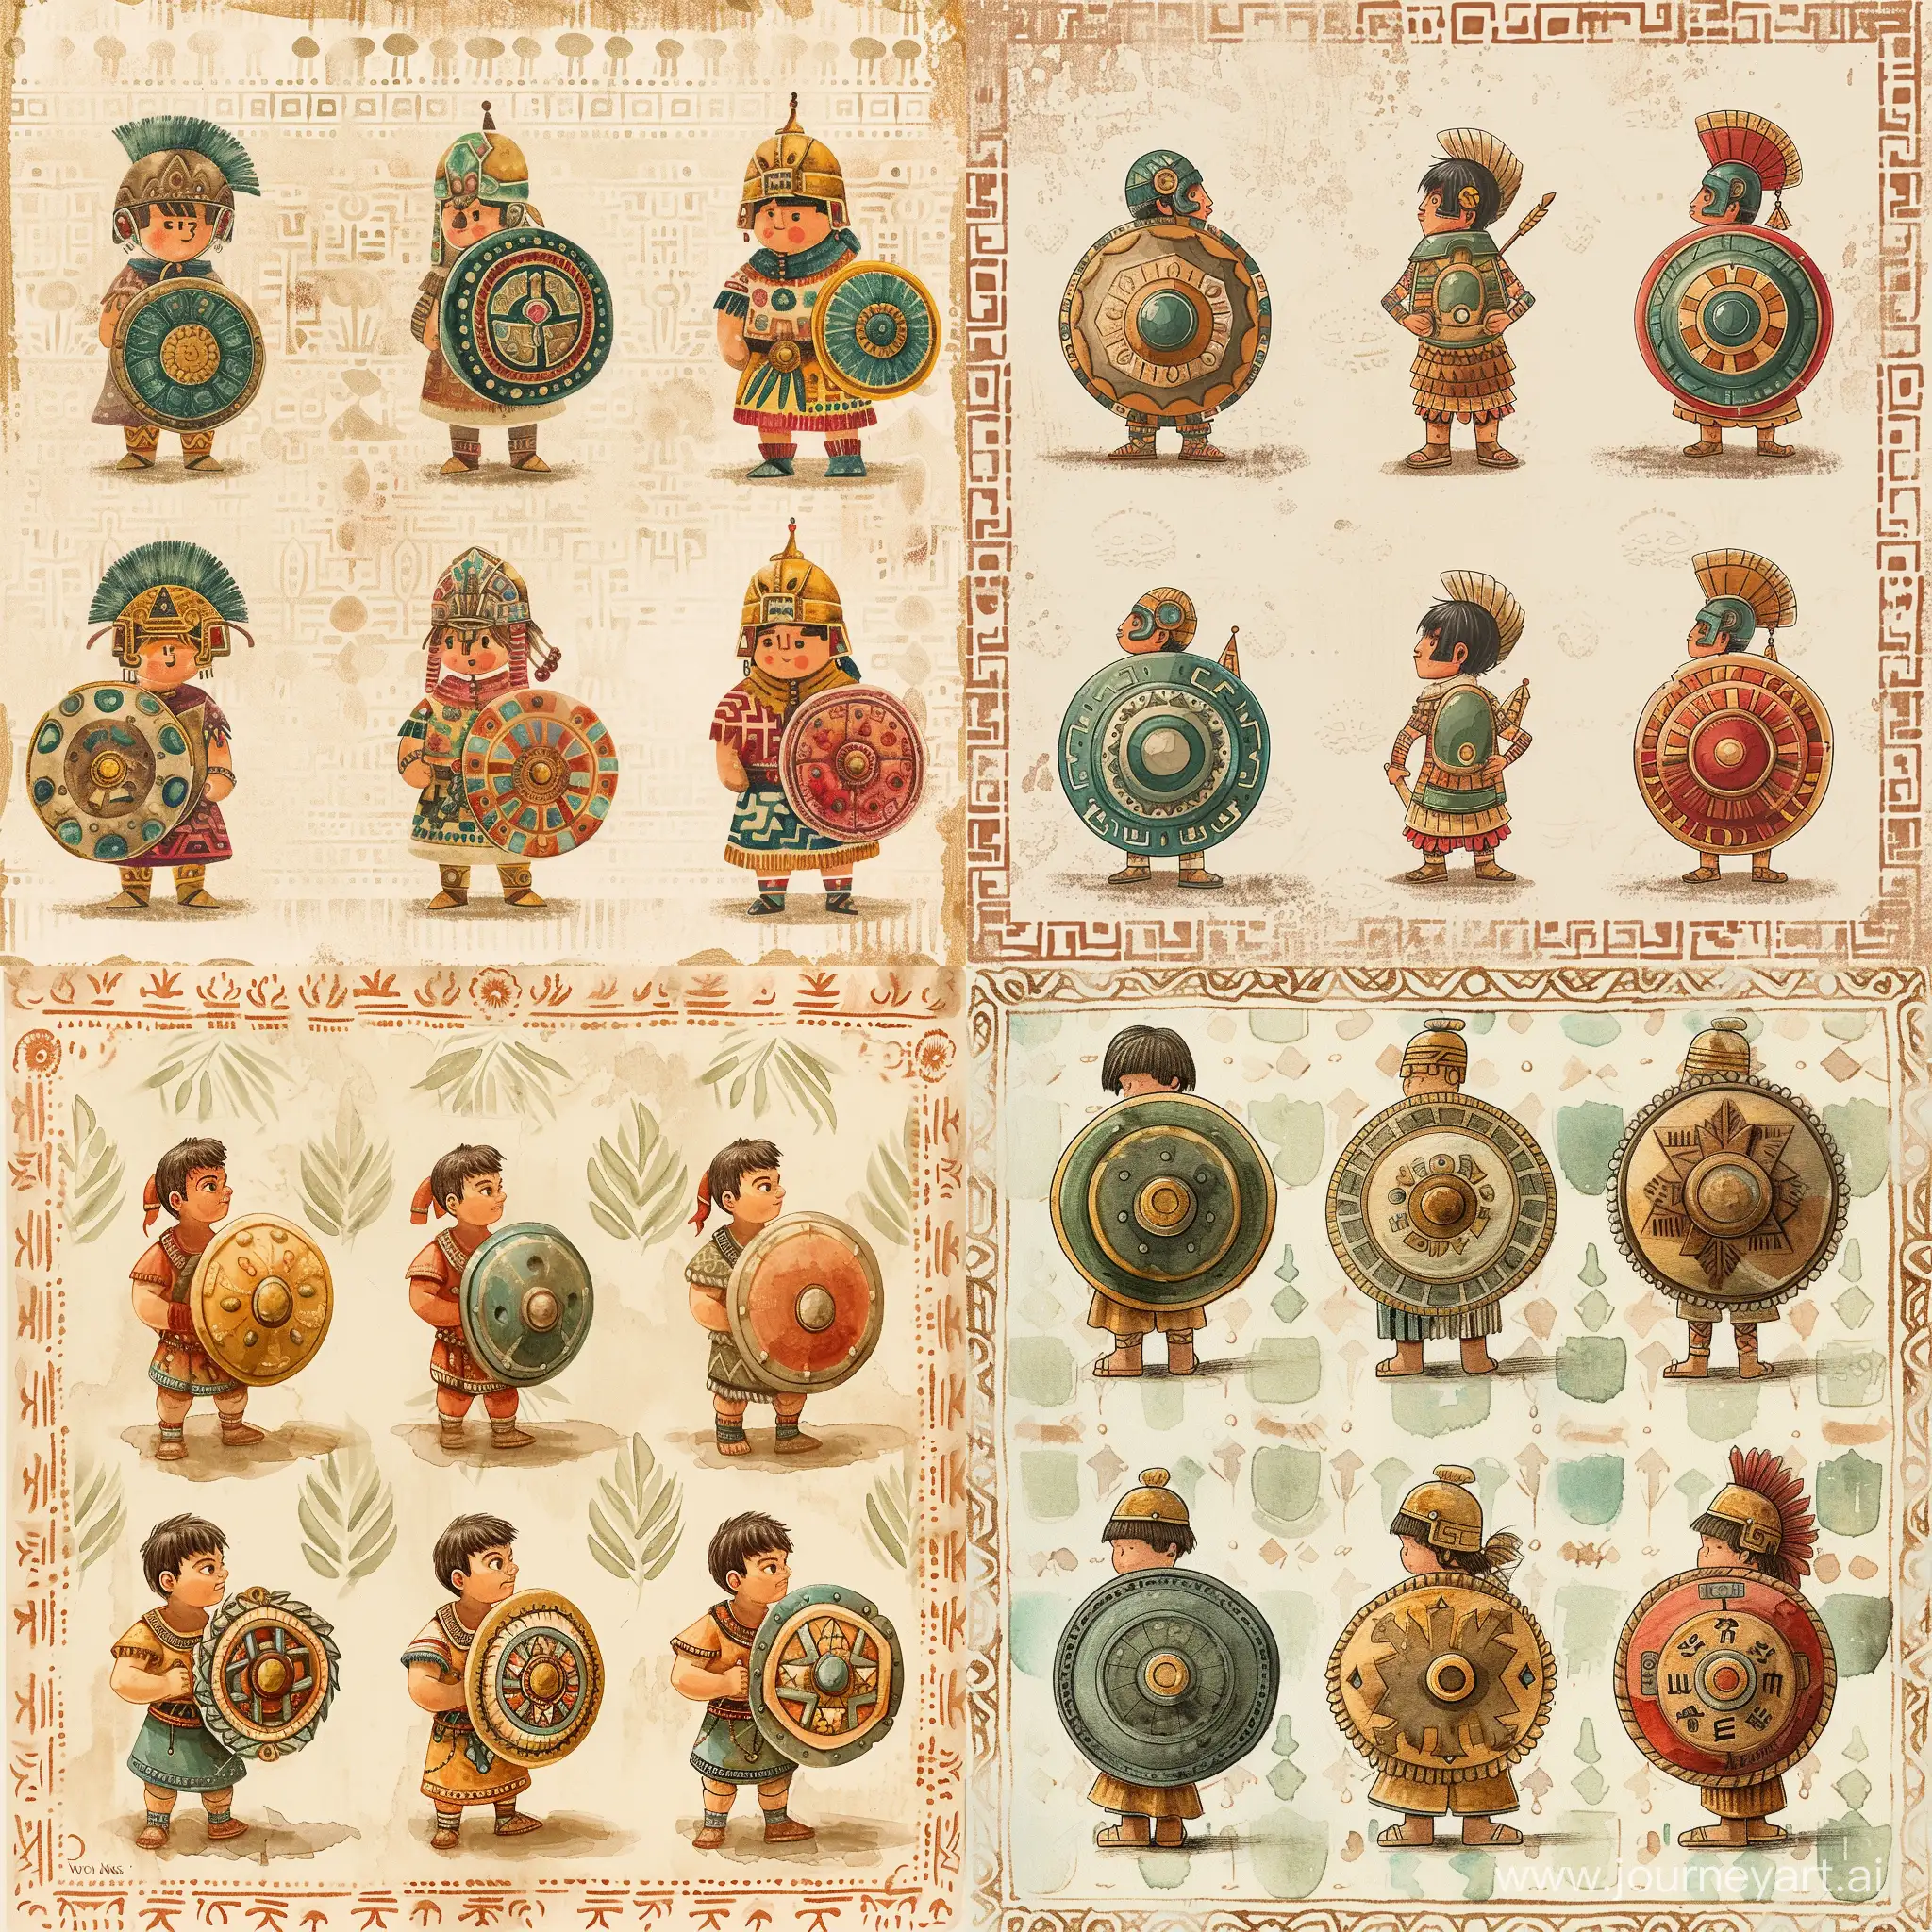 Six small figures of the inhabitants of the ancient Aztecs, with shields, on the background of the pattern of Ancient Rome, fabulous illustration, stylization, Victor Nagi, watercolor, decorative, flat drawing